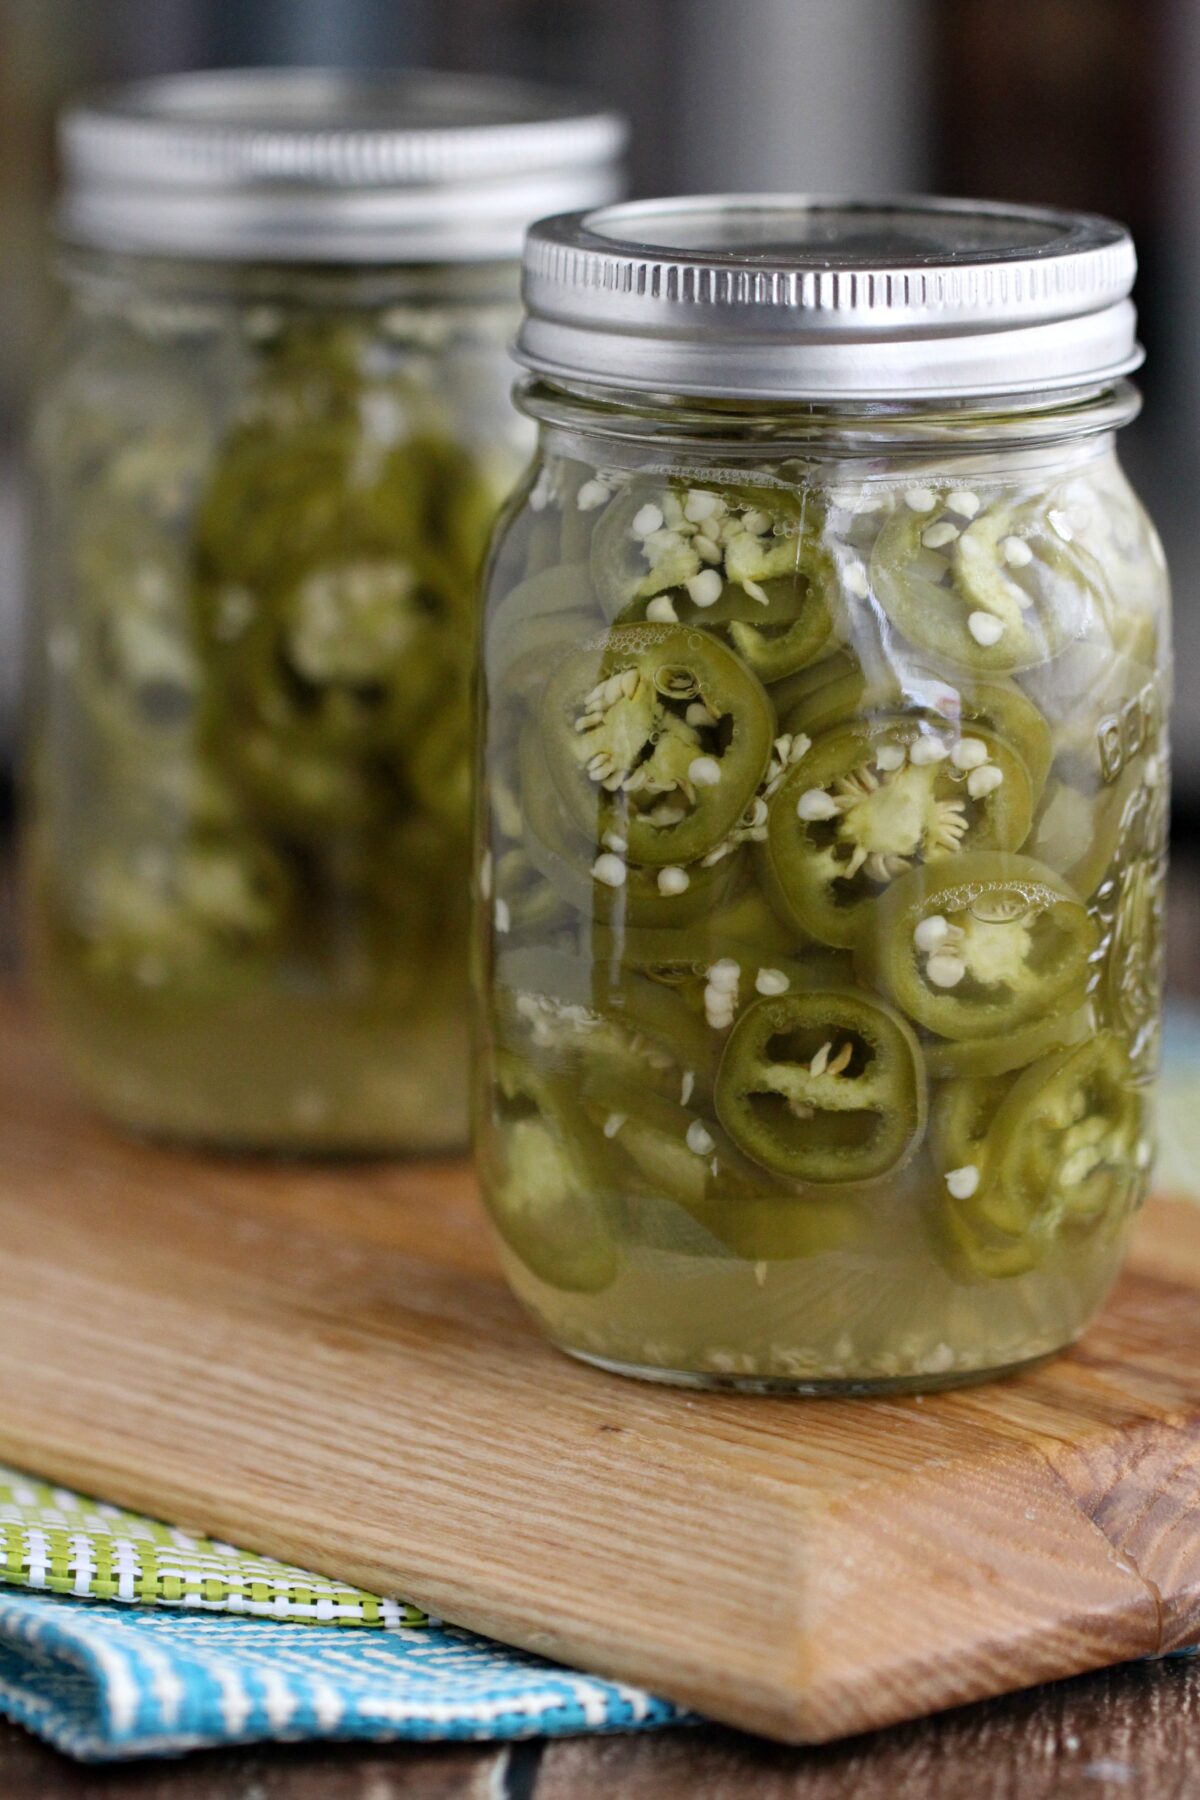 Make Perfect Pickled Jalapeño Peppers with this quick and easy canning recipe. These are super hot and spicy!